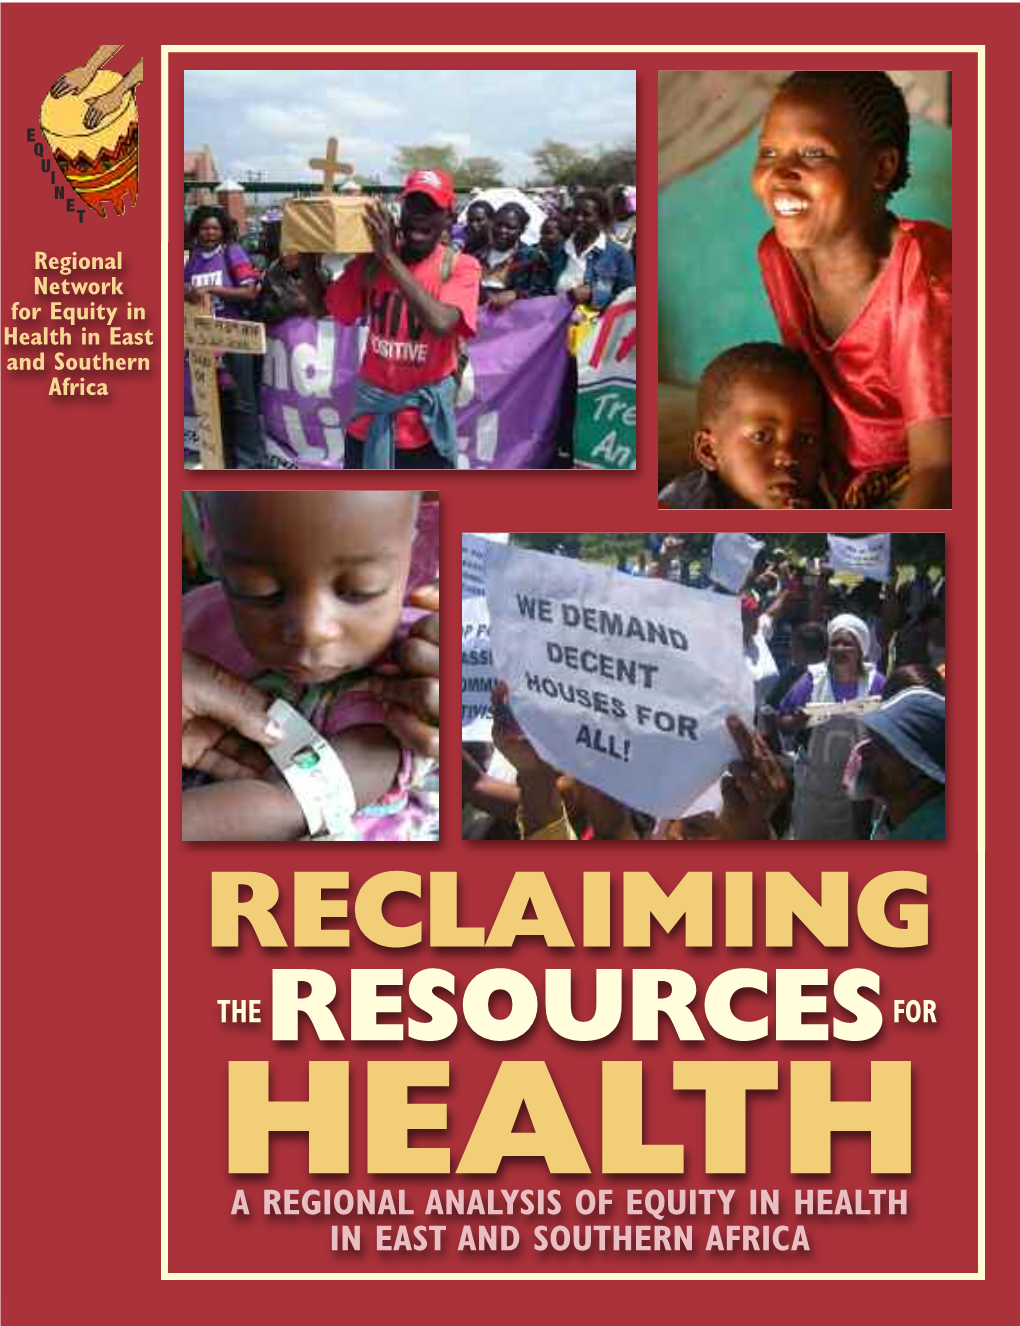 Reclaiming the Resources for Health a Regional Analysis of Equity in Health in East and Southern Africa